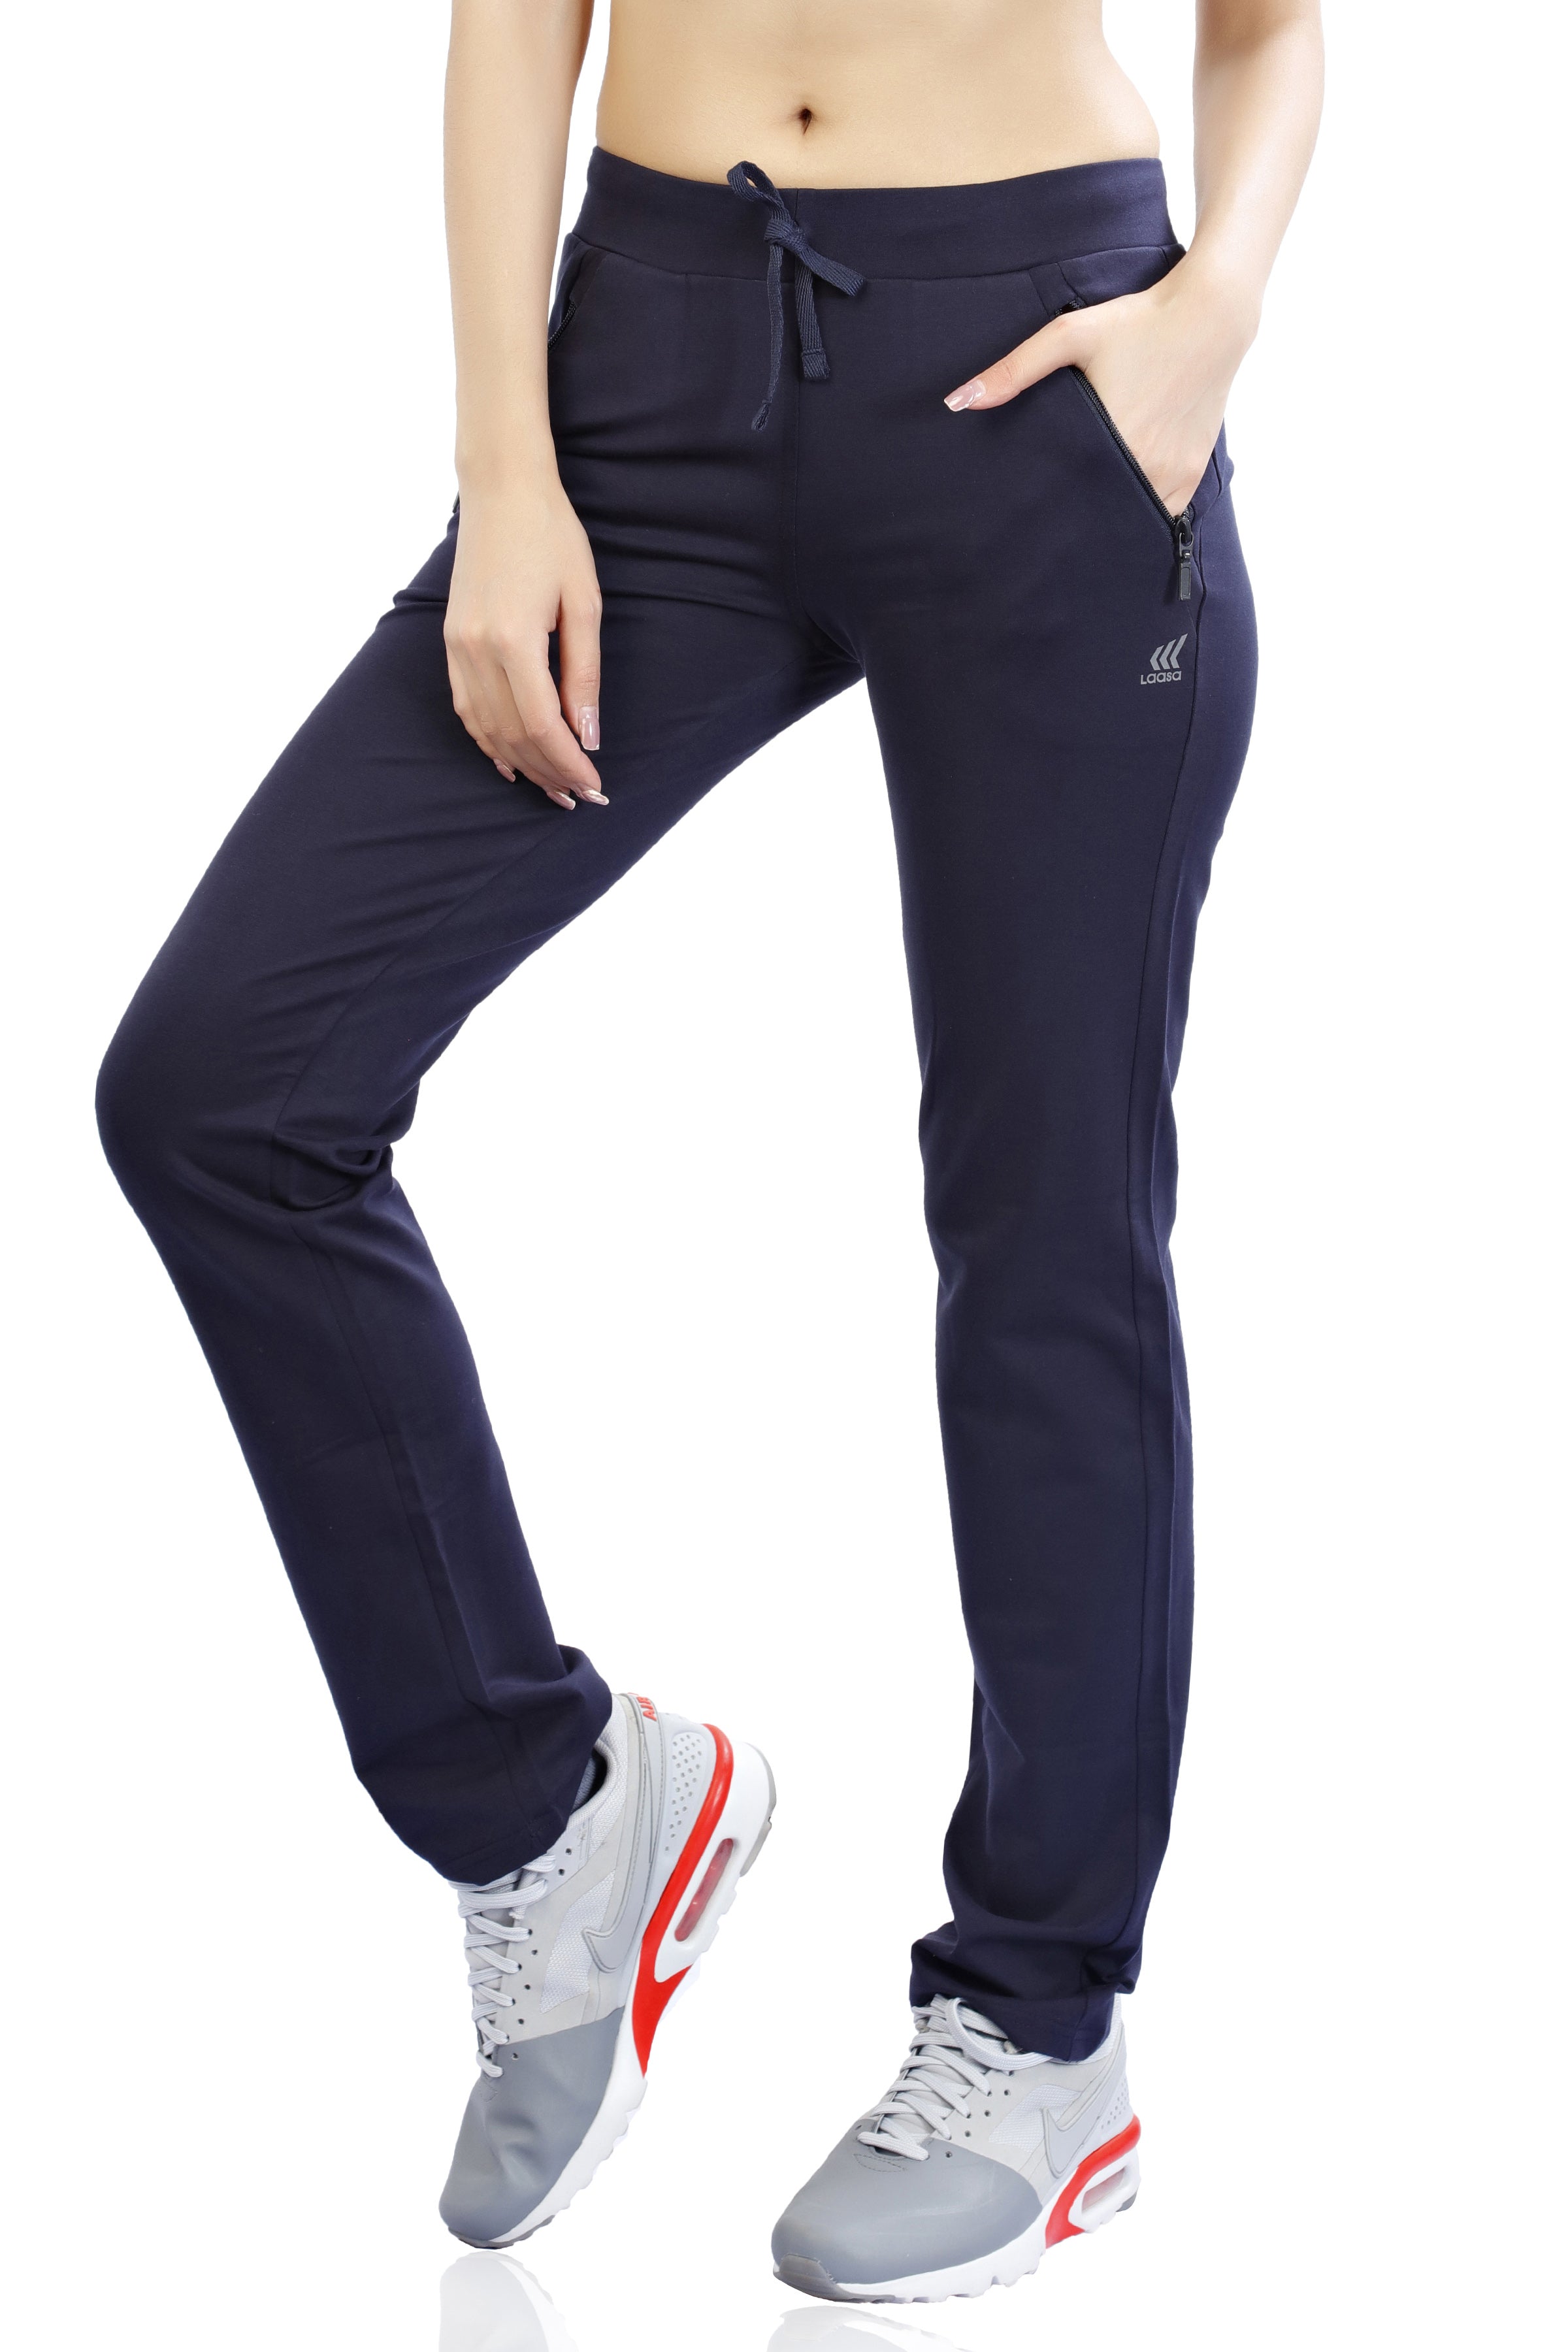 Domyos 8556348 Women's Fitness Leggings with Pocket, M / W30 L29 (Blue) :  Amazon.in: Clothing & Accessories